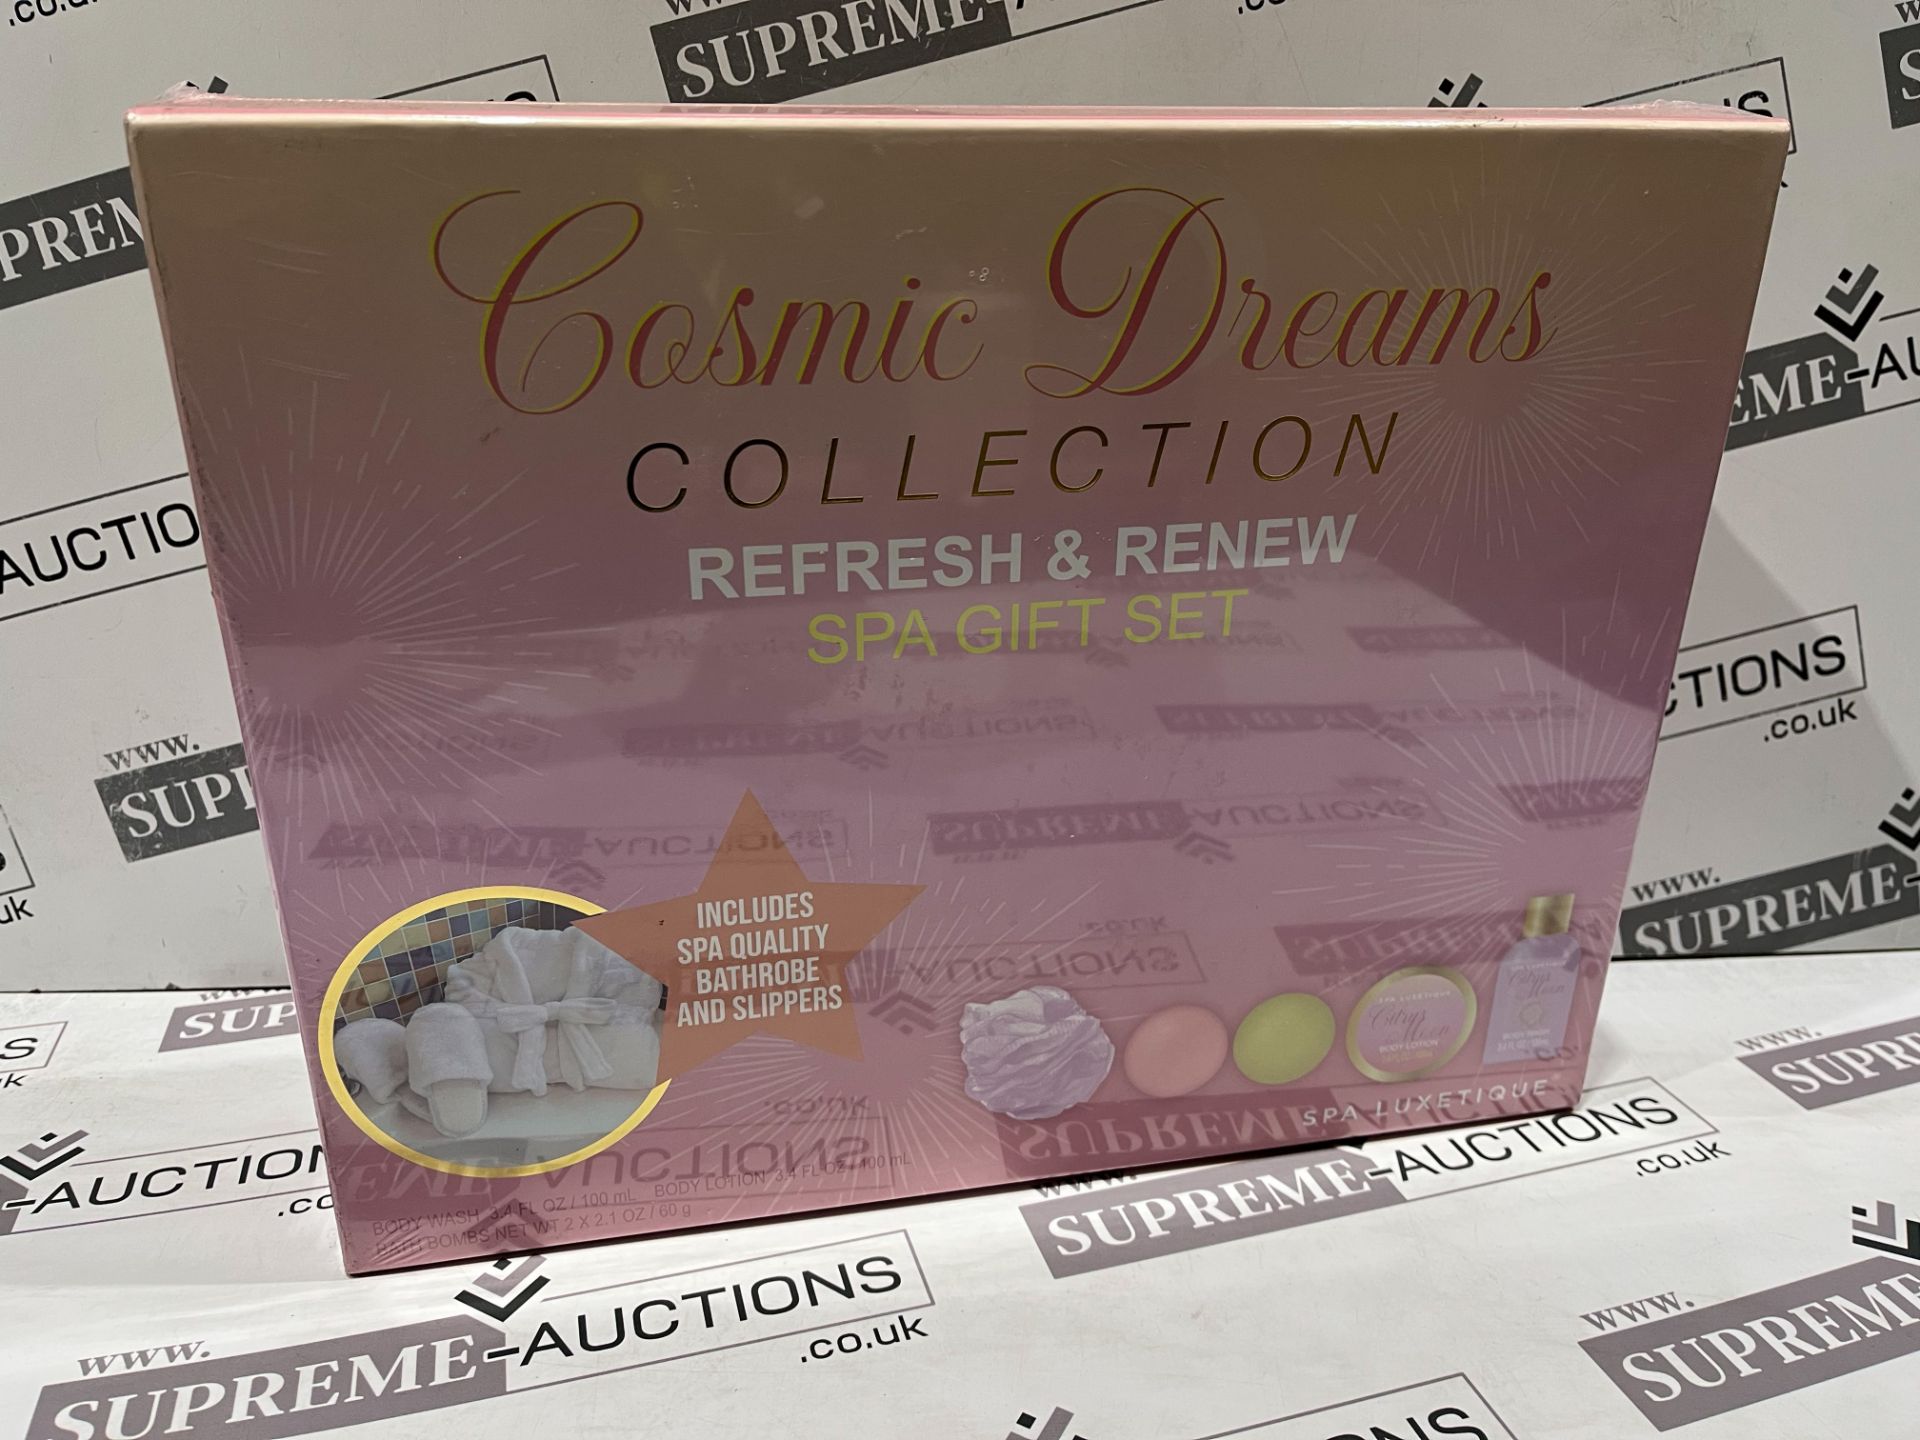 20 X BRAND NEW COSMIC DREAMS COLLECTION REFRESH AND RENEW LARGE SPA GIFT SETS R9-7